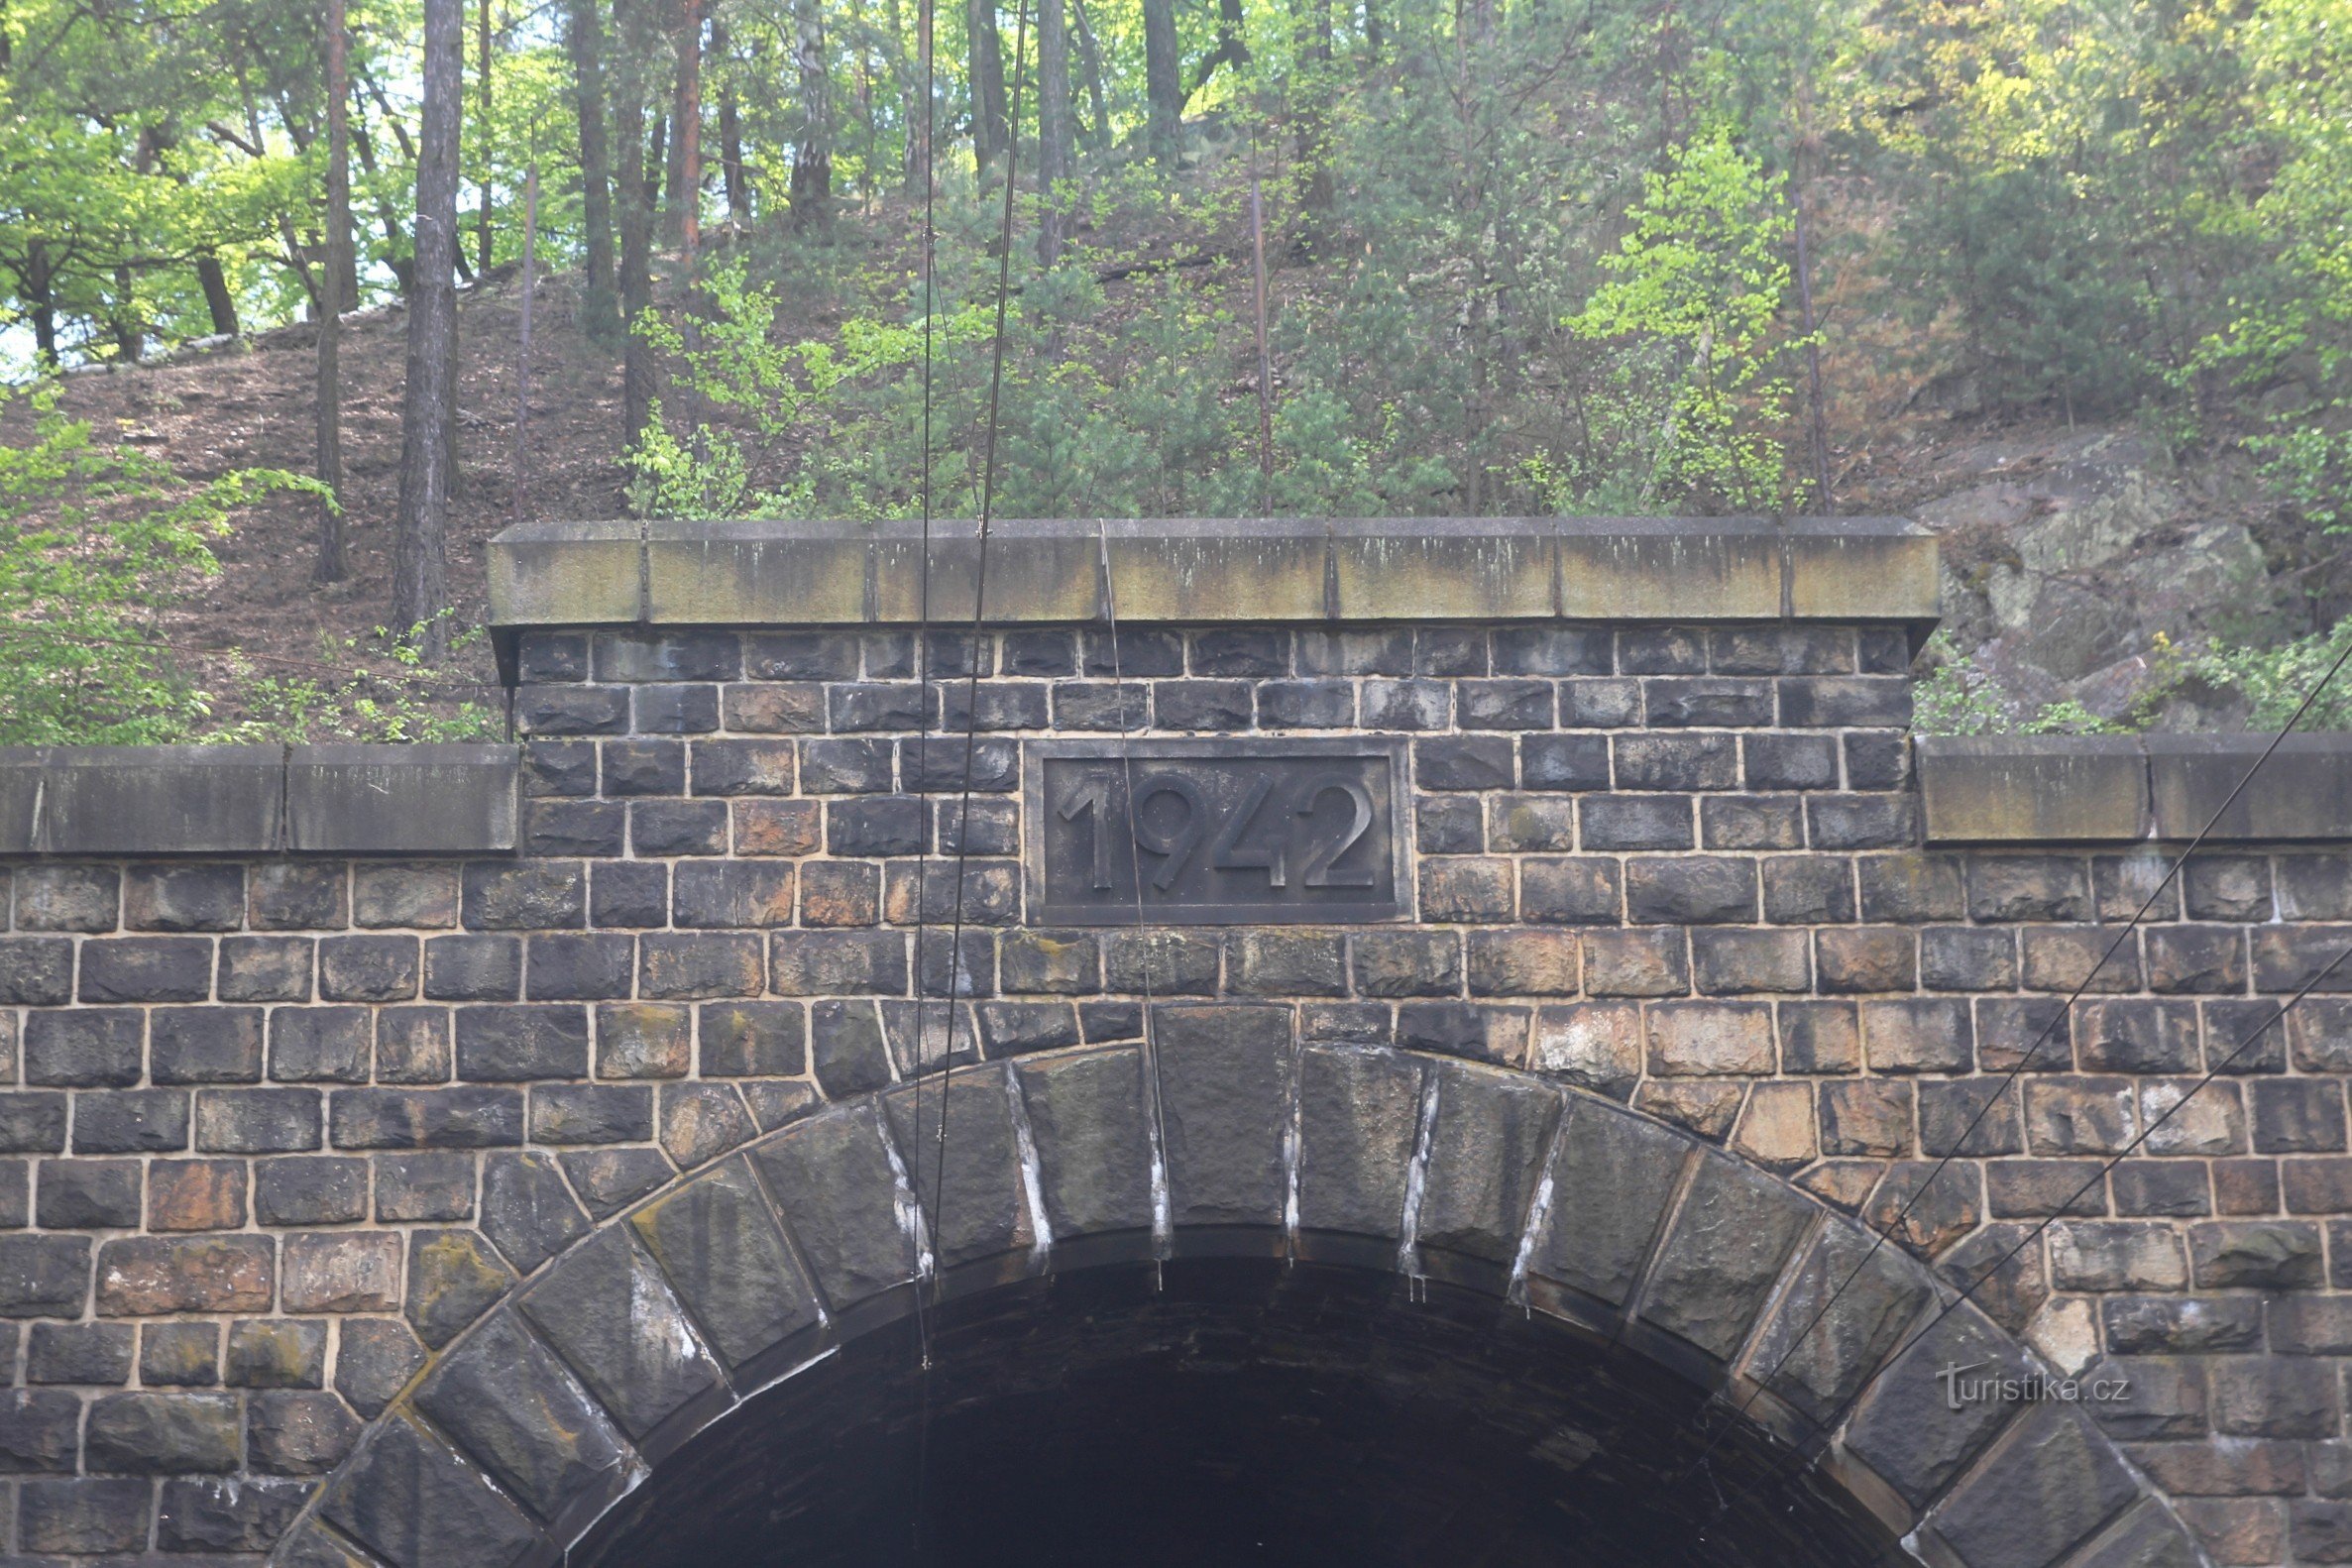 The upper part of the portal of one of the tunnels with the date of construction